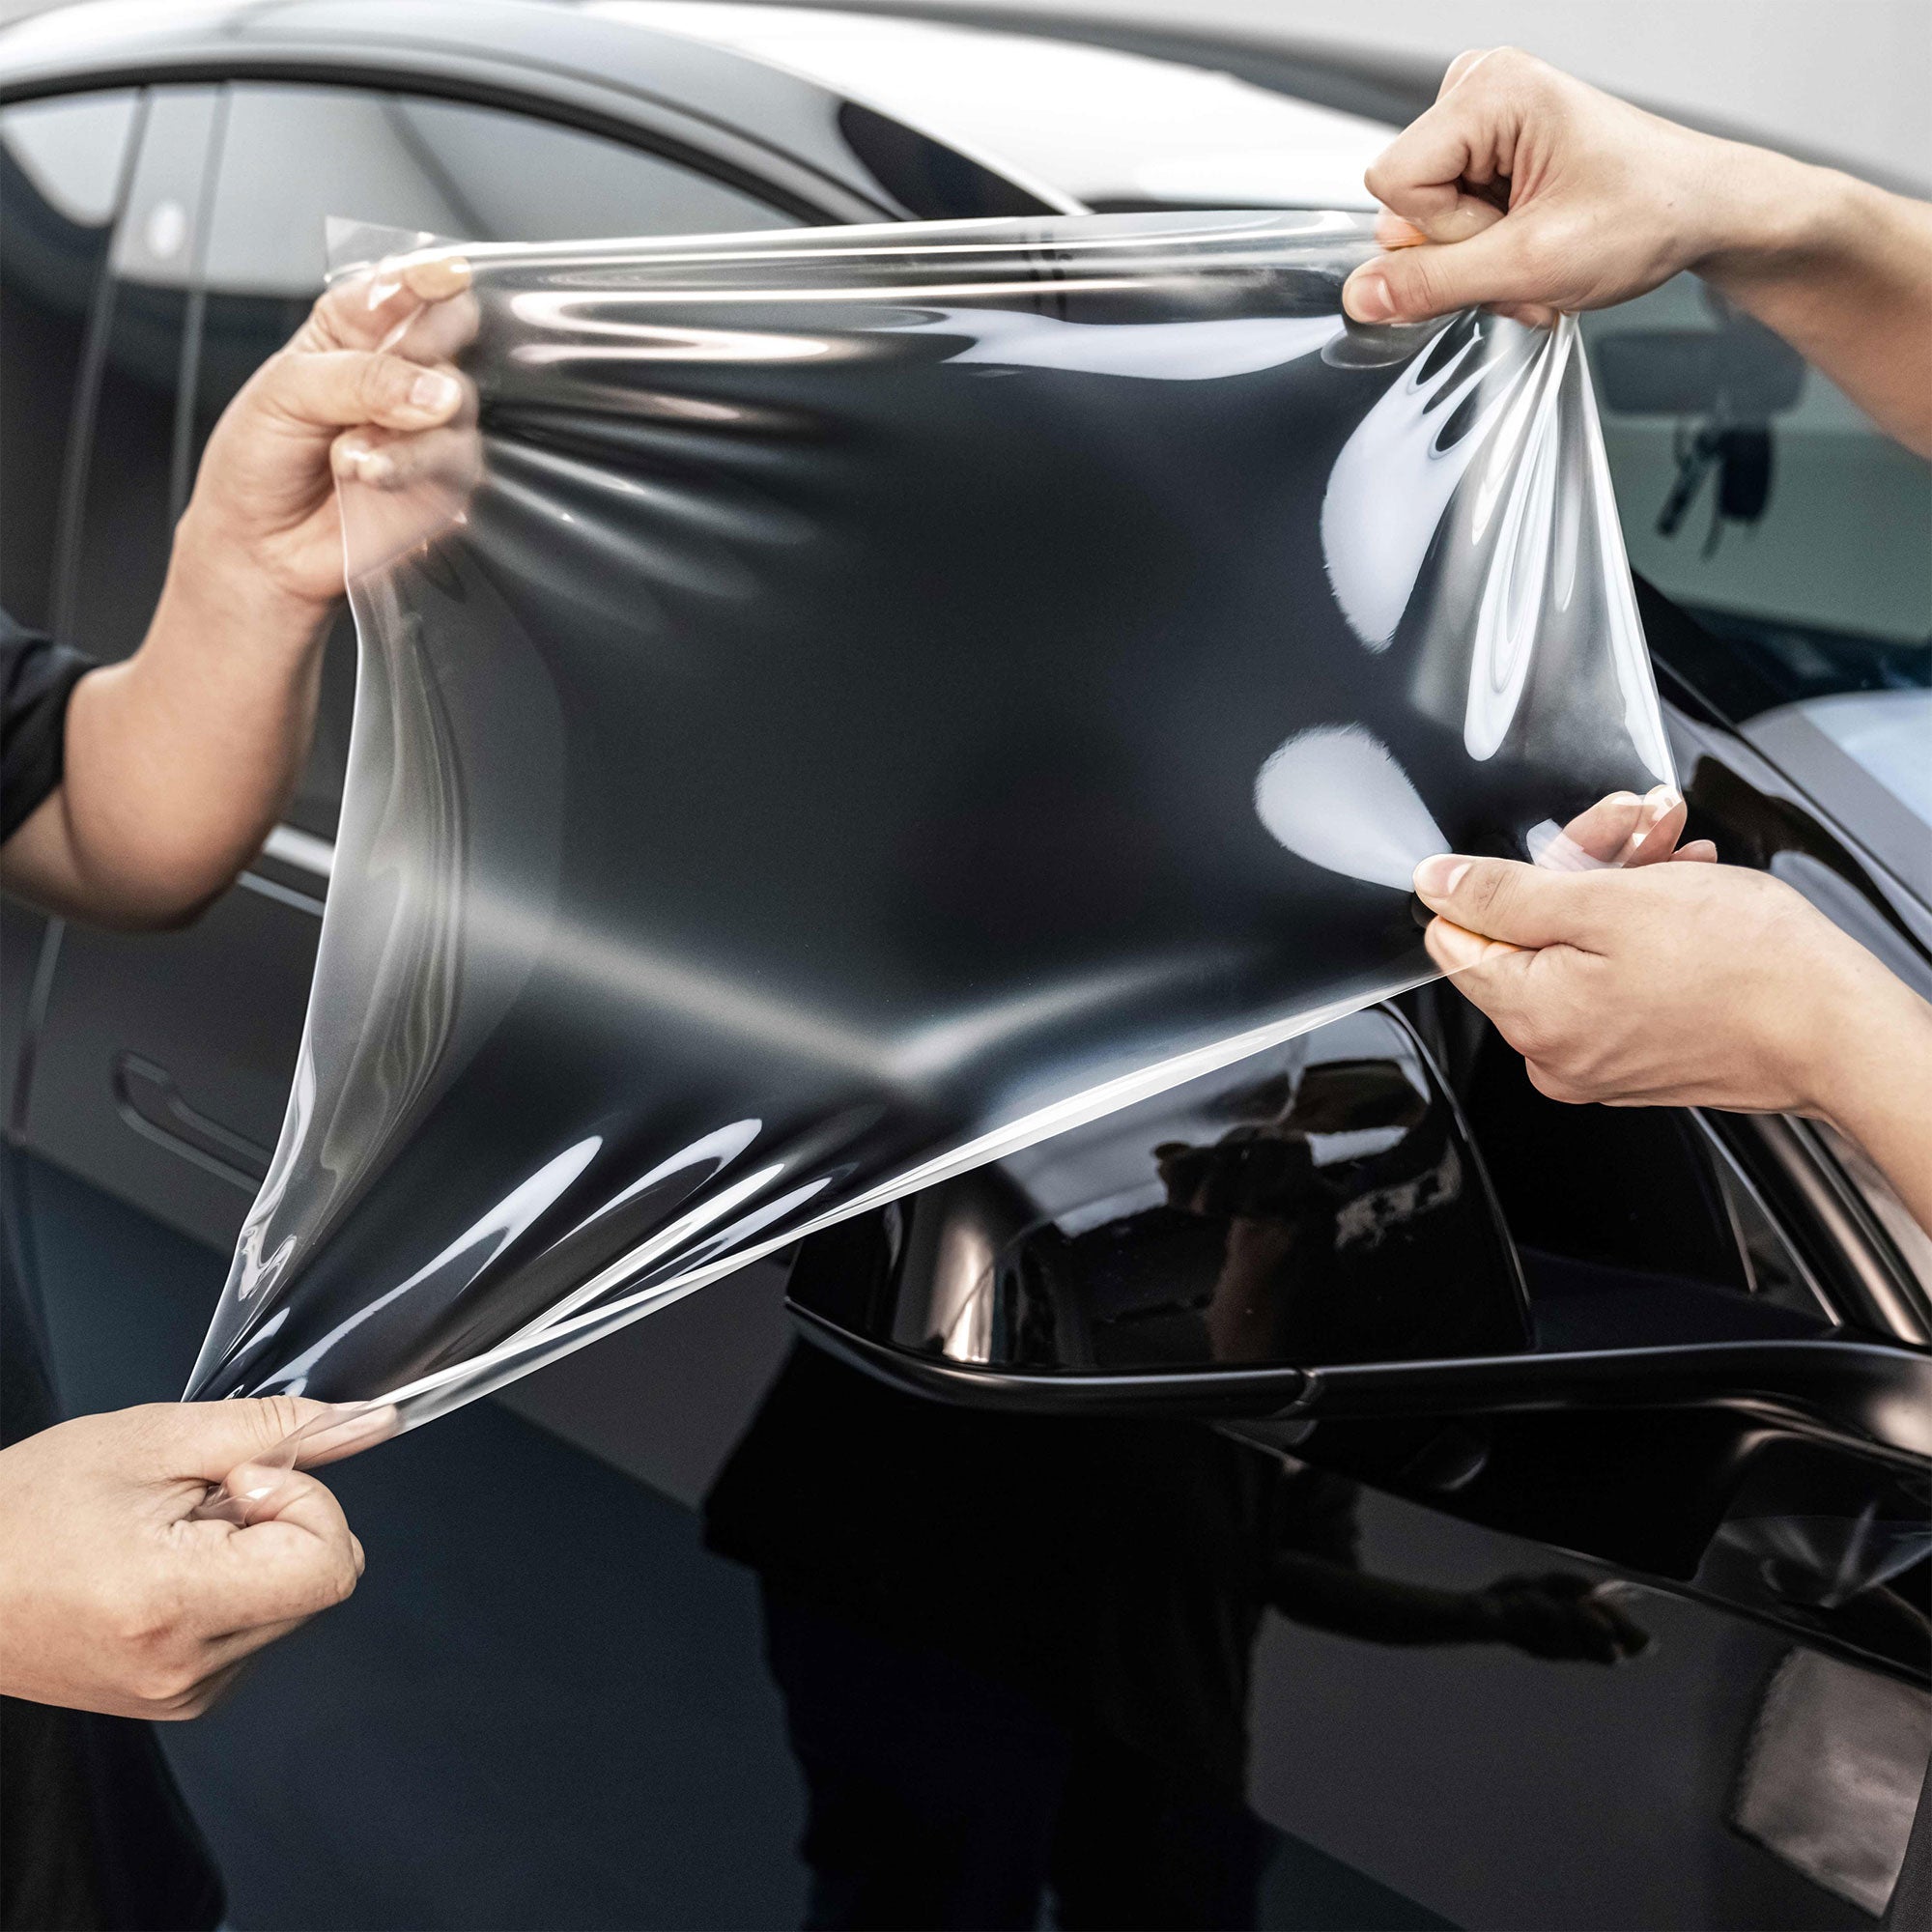 How To Apply Paint Protection Film - Step-By-Step Guide – vinylfrog